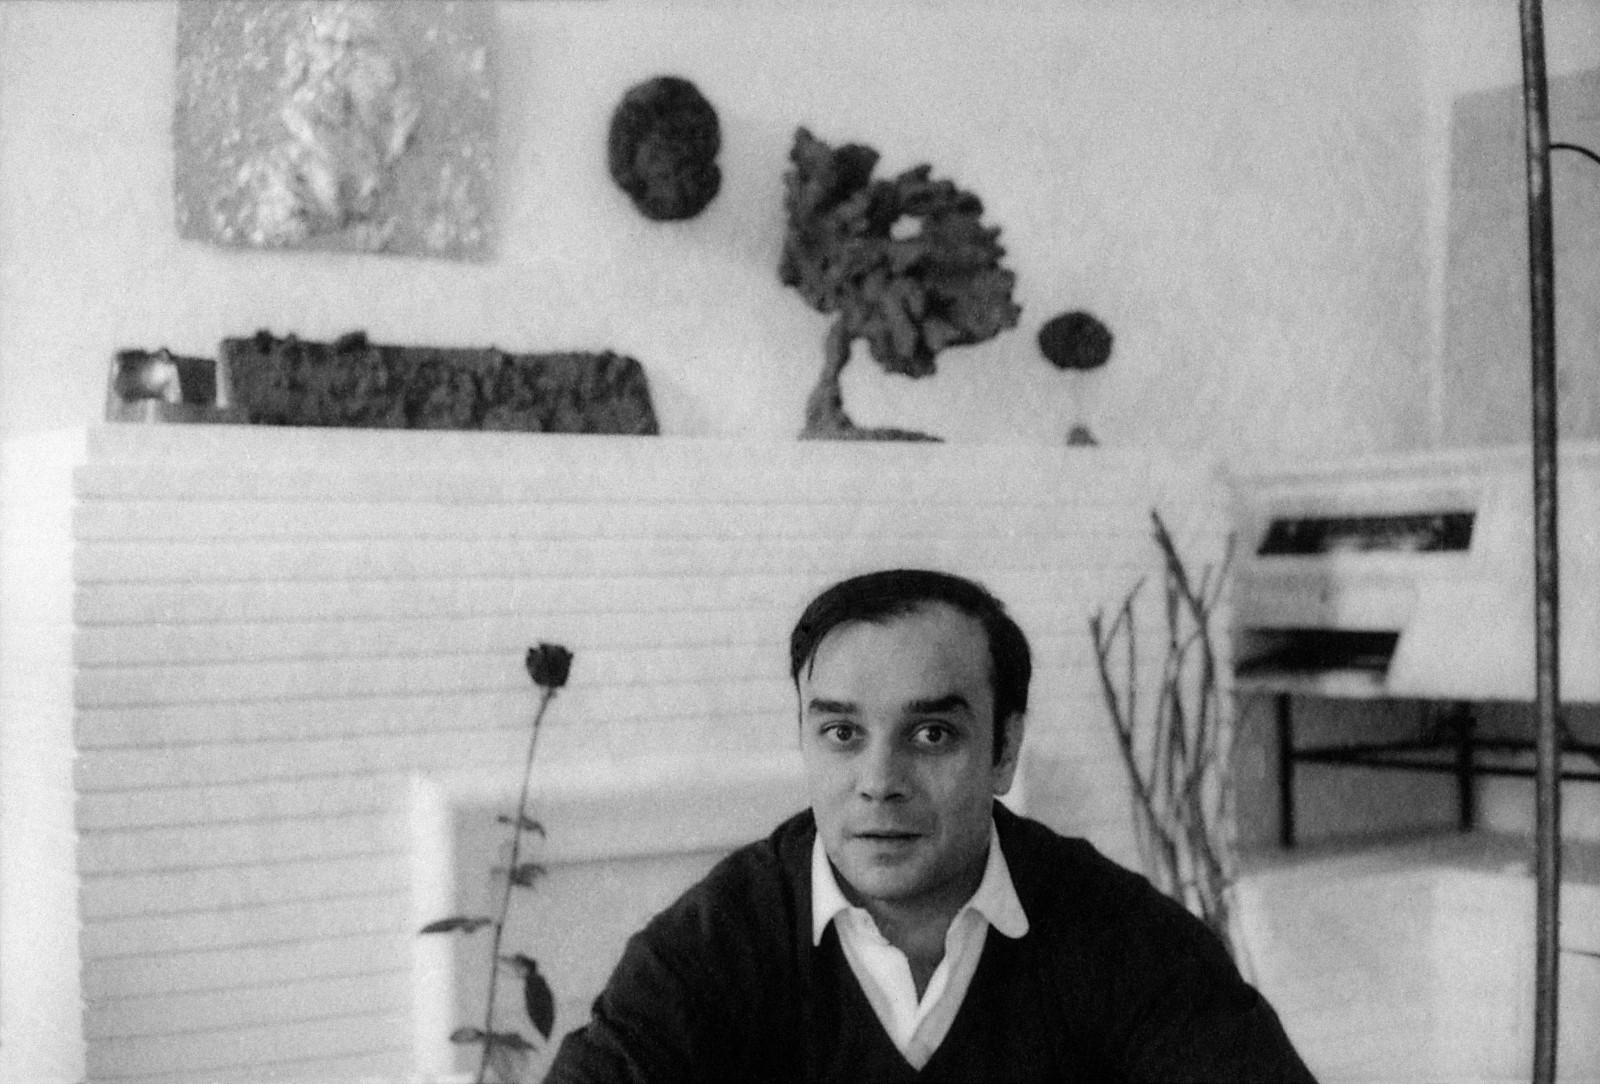 Yves Klein in his studio with his works (MG 5, RE 7, SE 33, SE 72)